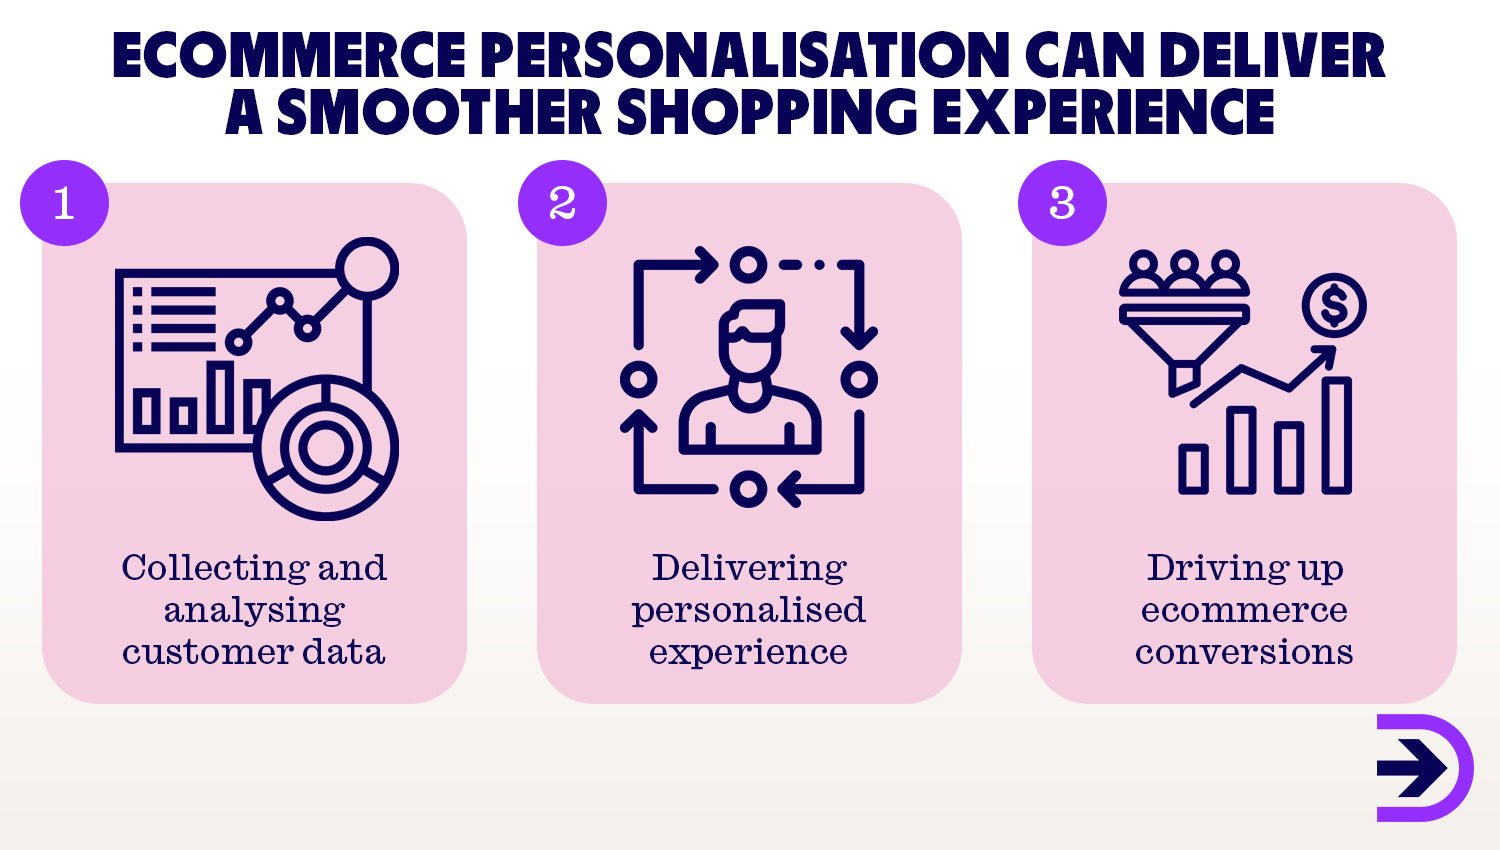 Ecommerce personalisation begins with collecting and analysing customer data, and using the learnings to drive conversions.